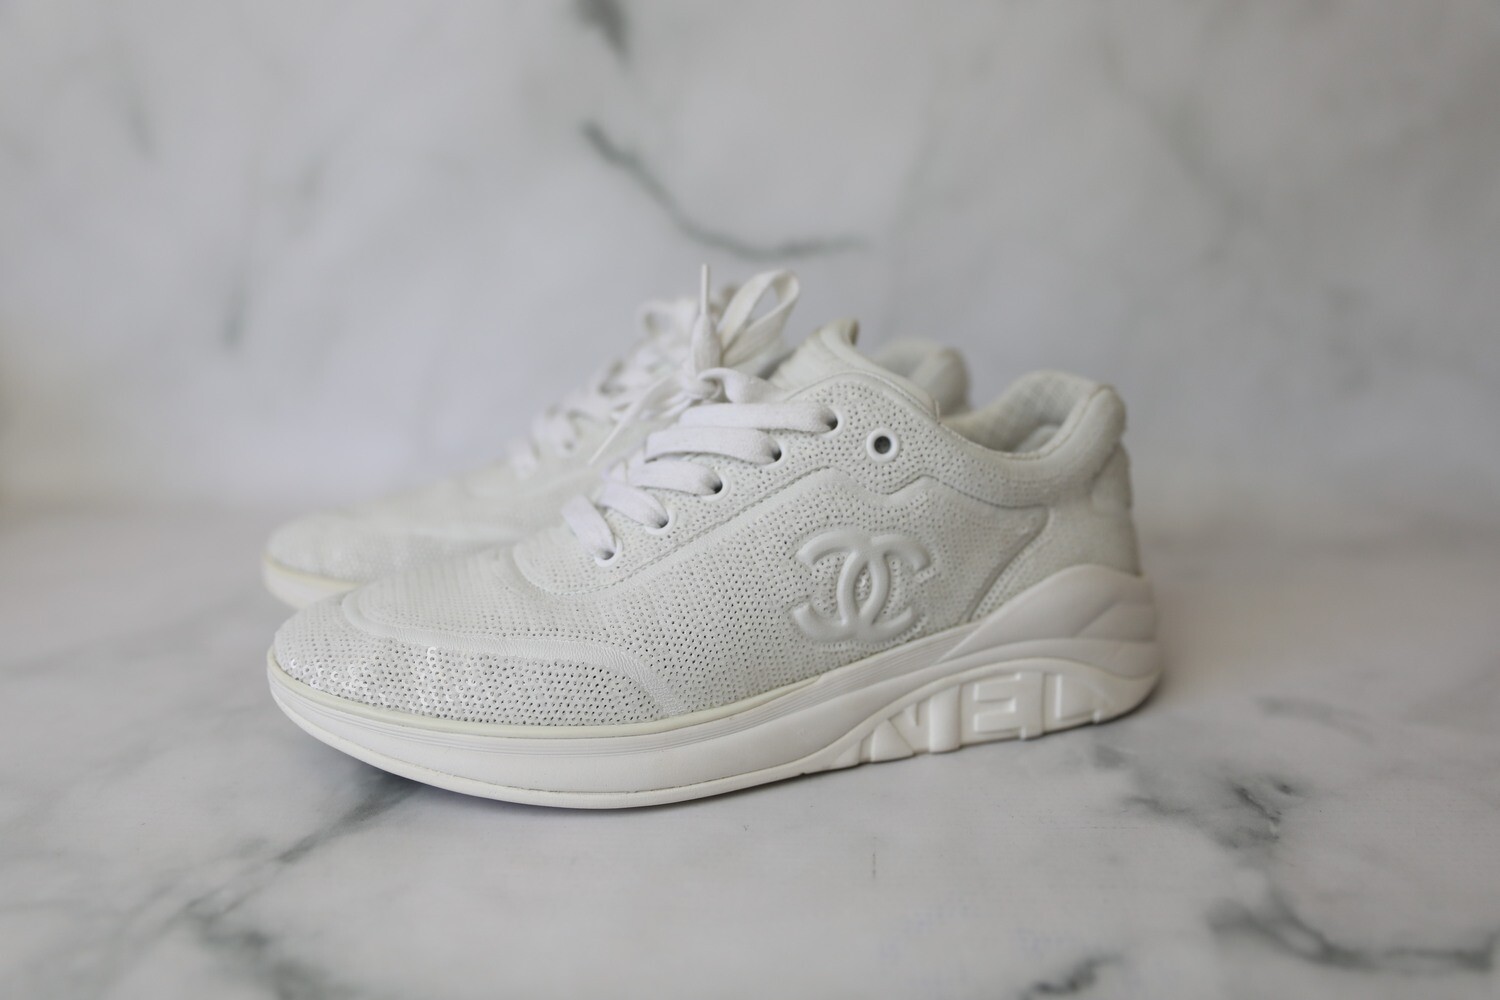 Chanel Shoes Sneakers, White, Size 36, New in Dustbag WA001